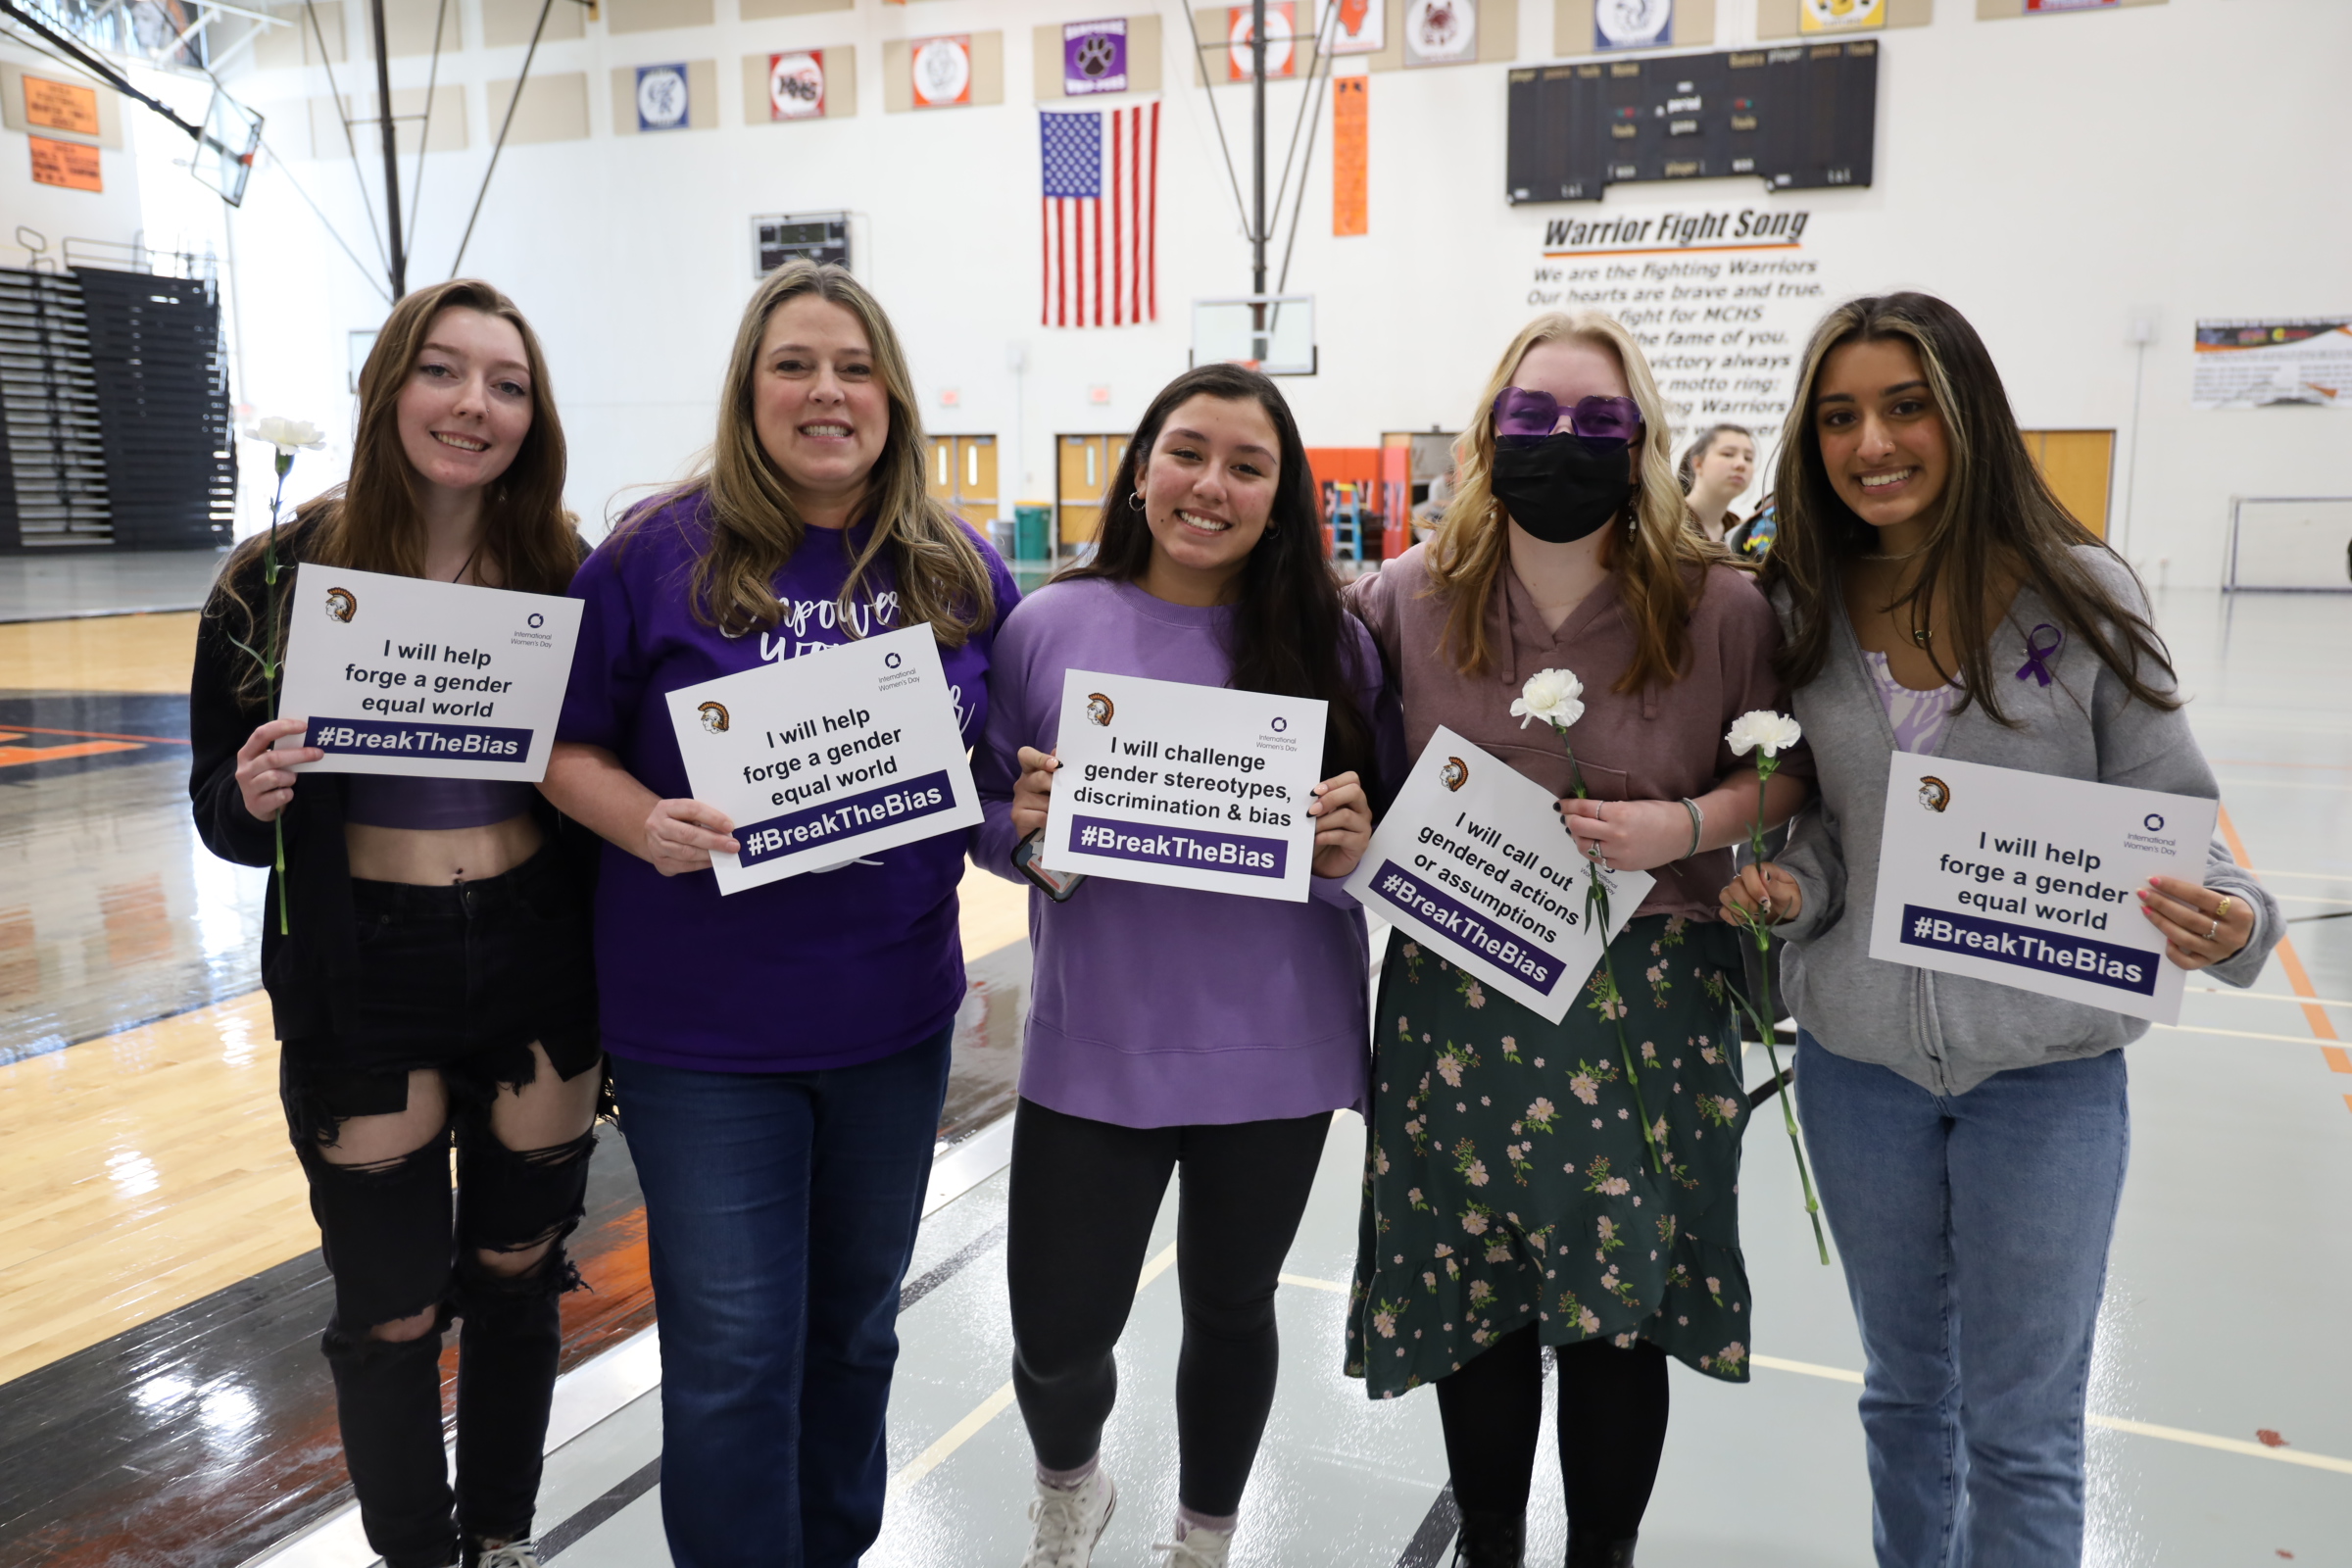 Students and teacher with women's day signs: "I will help forge a gender equal world." I will challenge gender stereotypes, discrimination and bias."I will call out gendered actions or assumptions." "I will help forge a gender equal world."